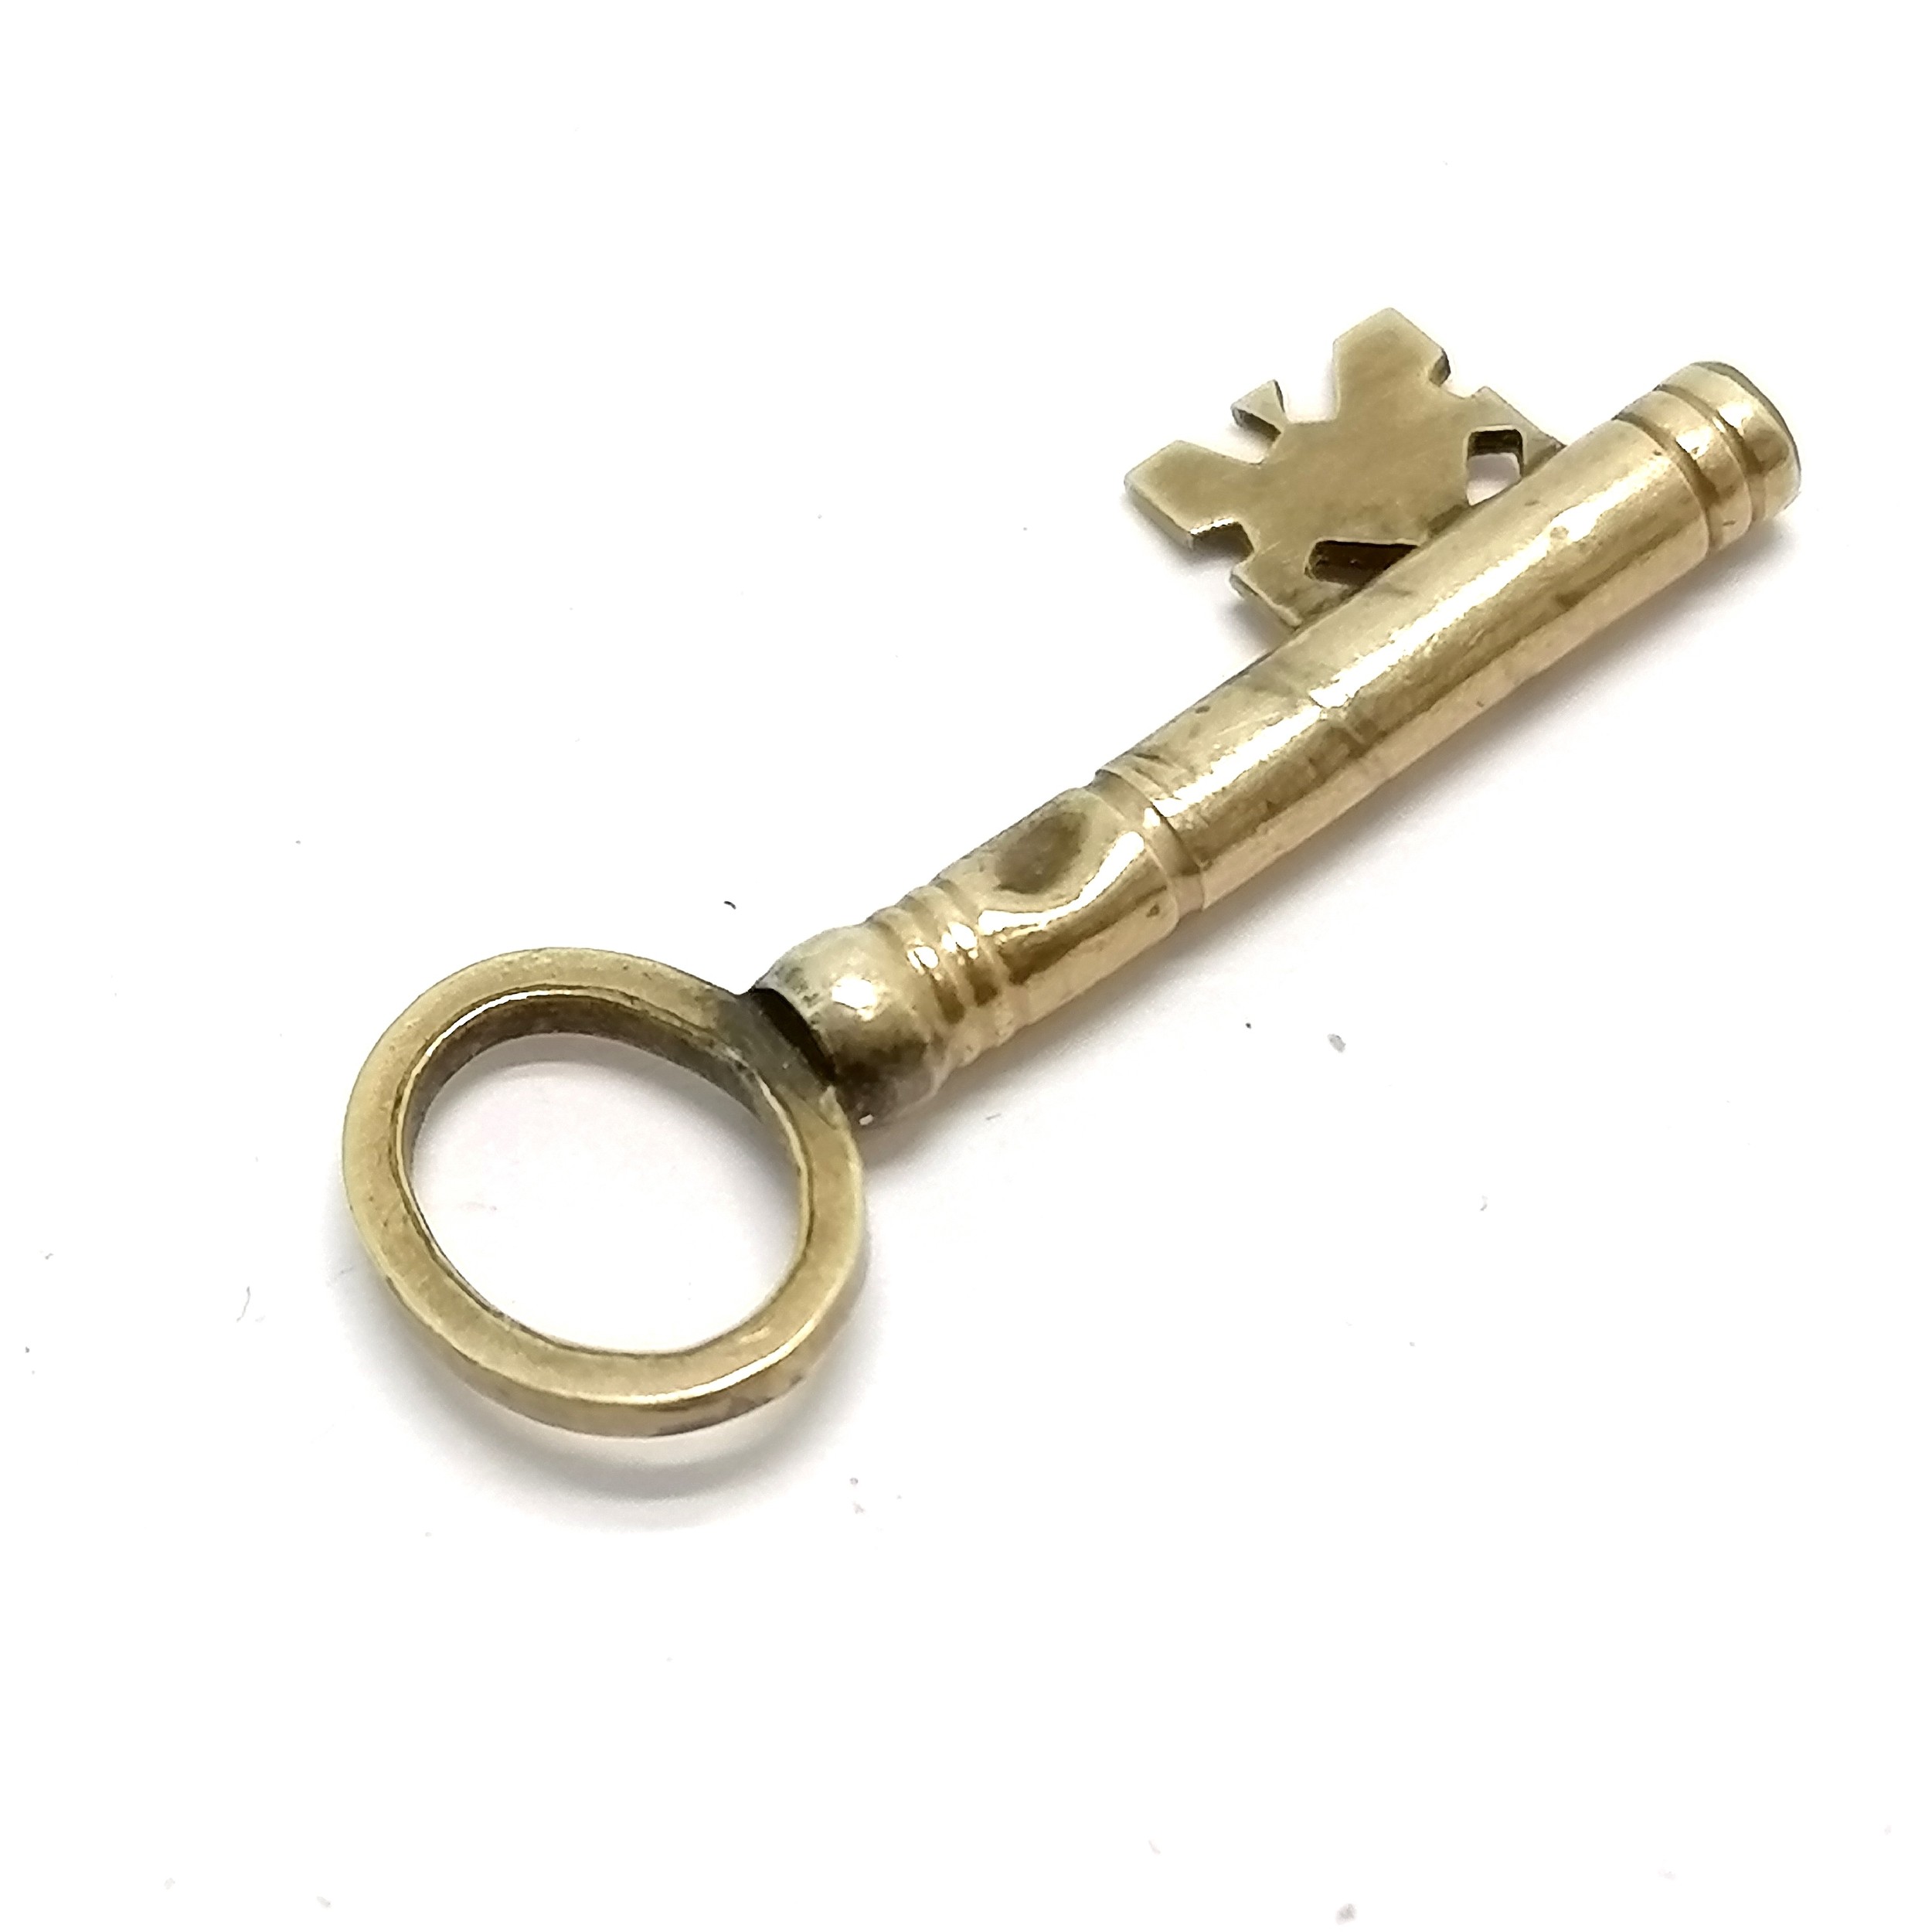 Antique novelty key shaped pocket watch key winder - 2.8cm and has a dent - Image 2 of 2